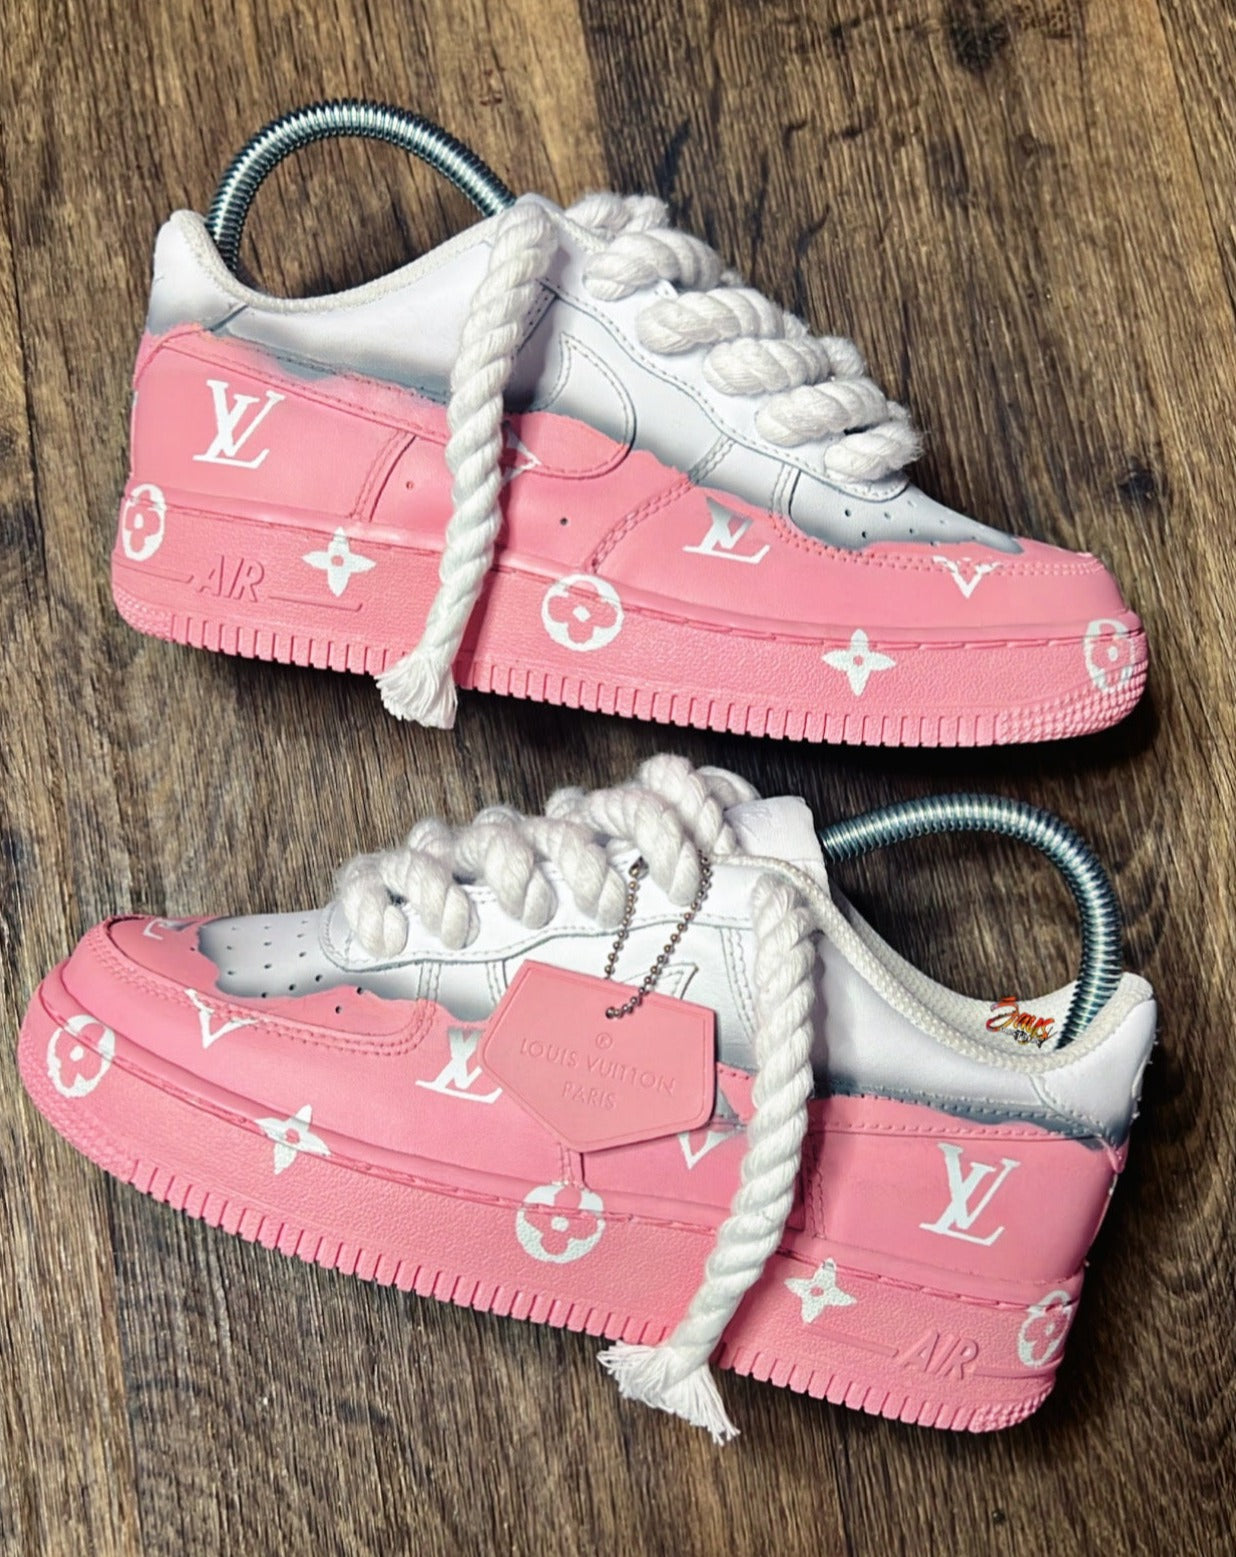 lv skate shoes rope laces